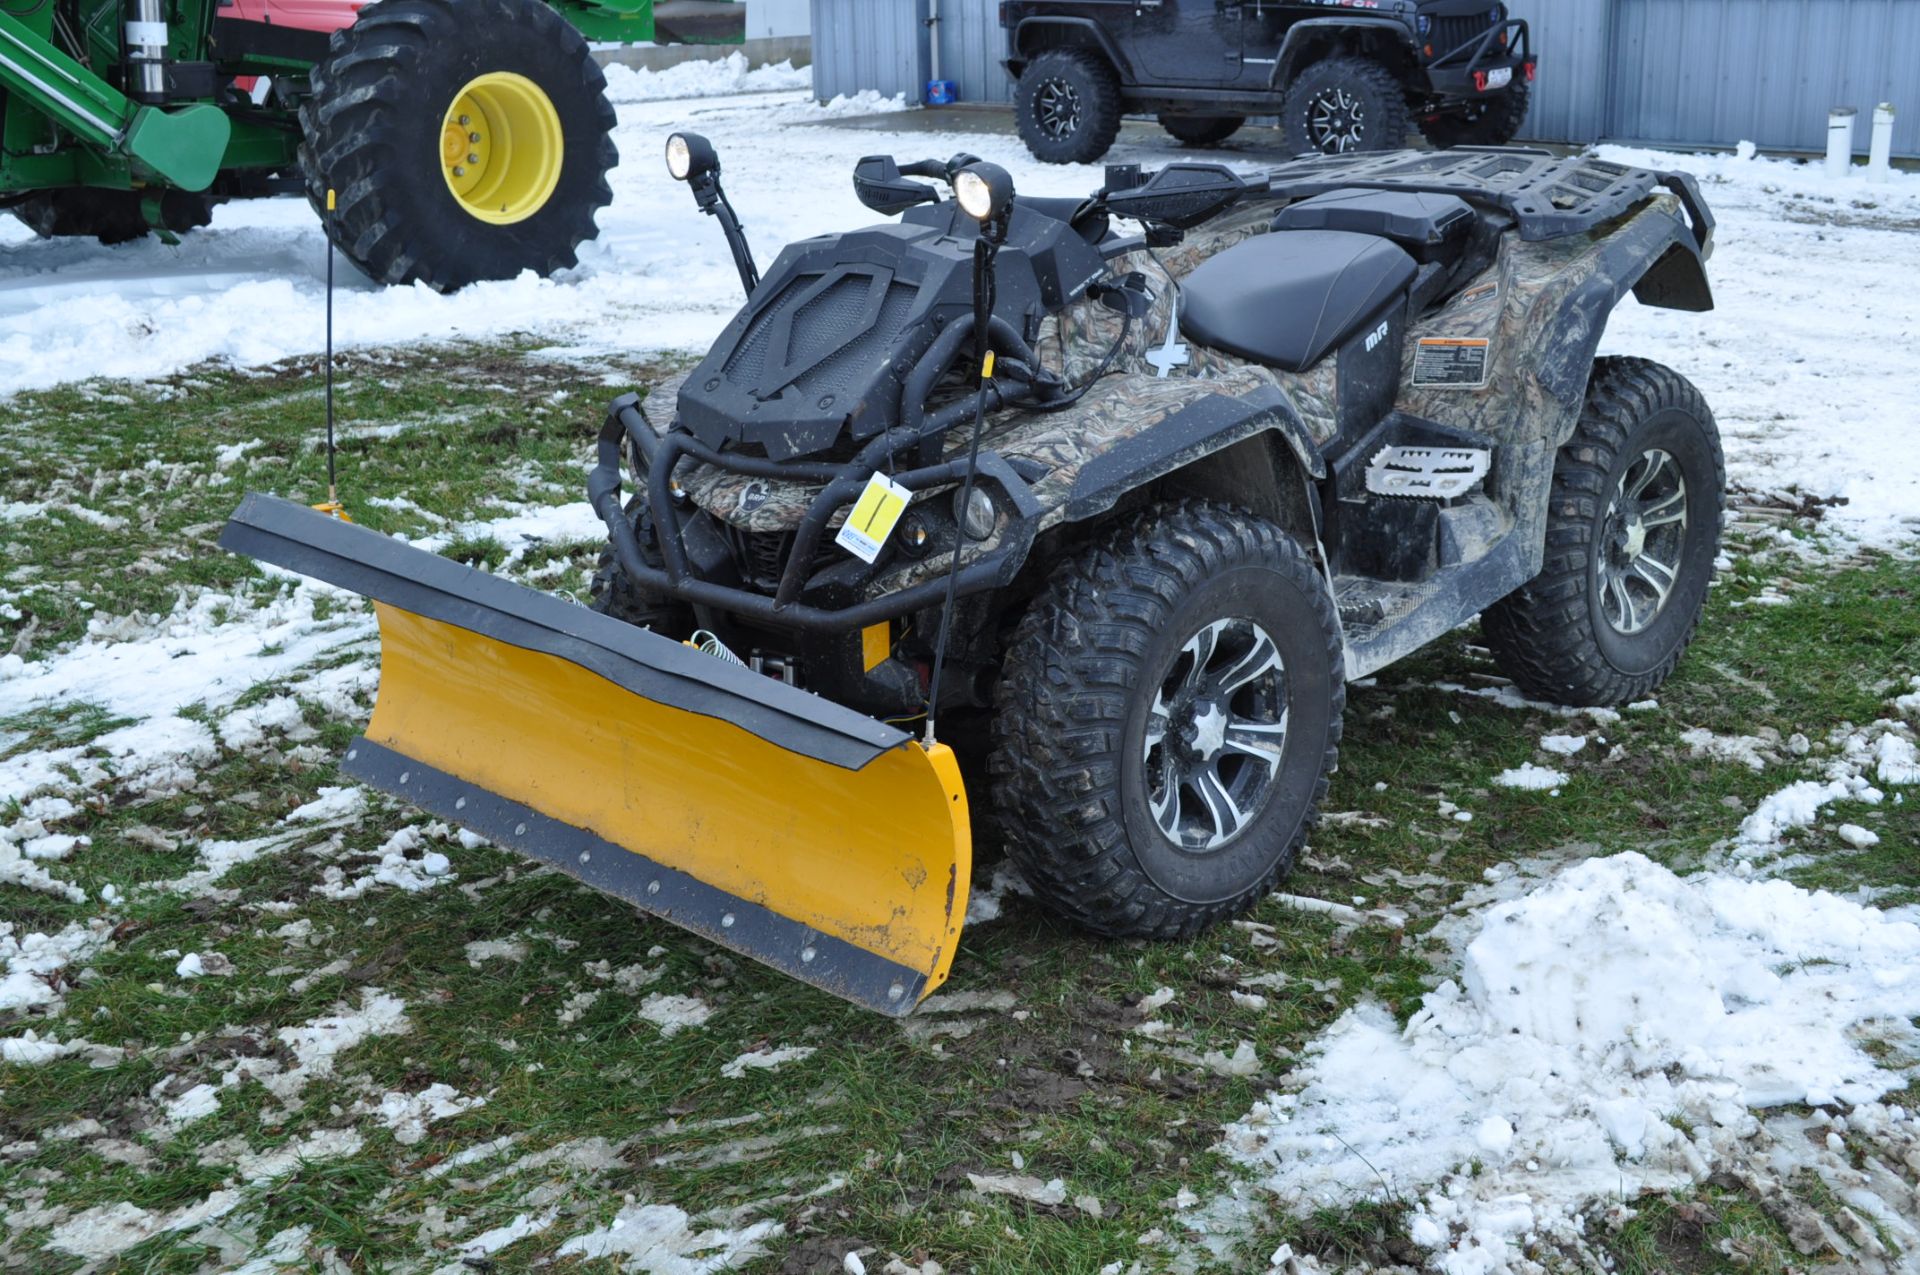 2013 Can-am Outlander 1000 X MR ATV, elec winch Model 5KDF, sells with snow plow, AT 30 x 10 R 14